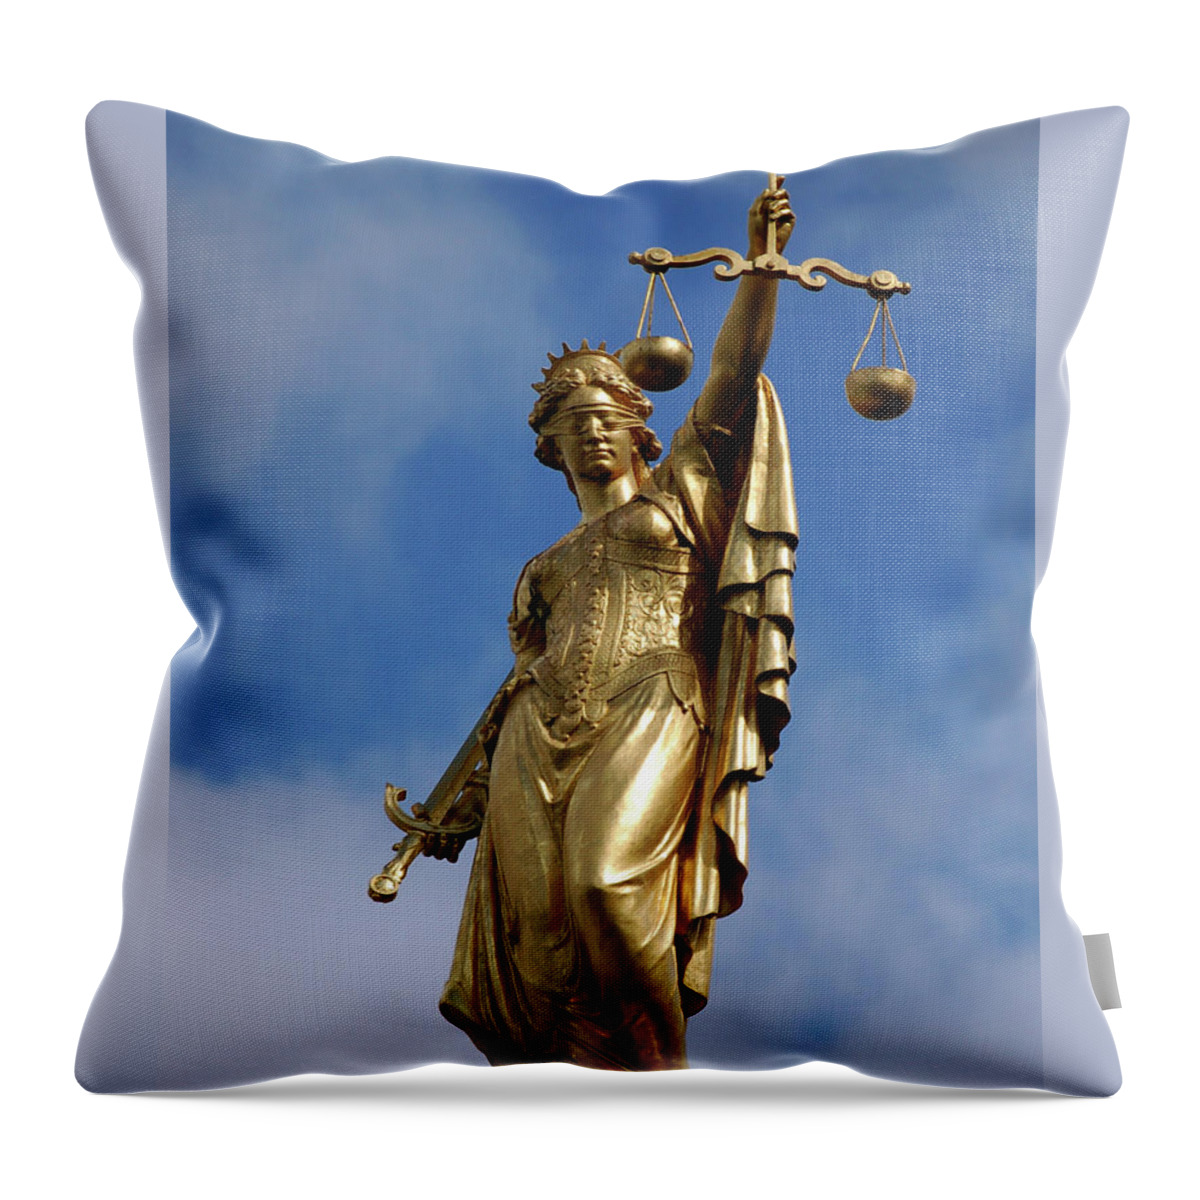 Statue Throw Pillow featuring the photograph Lady Justice in Bruges by RicardMN Photography